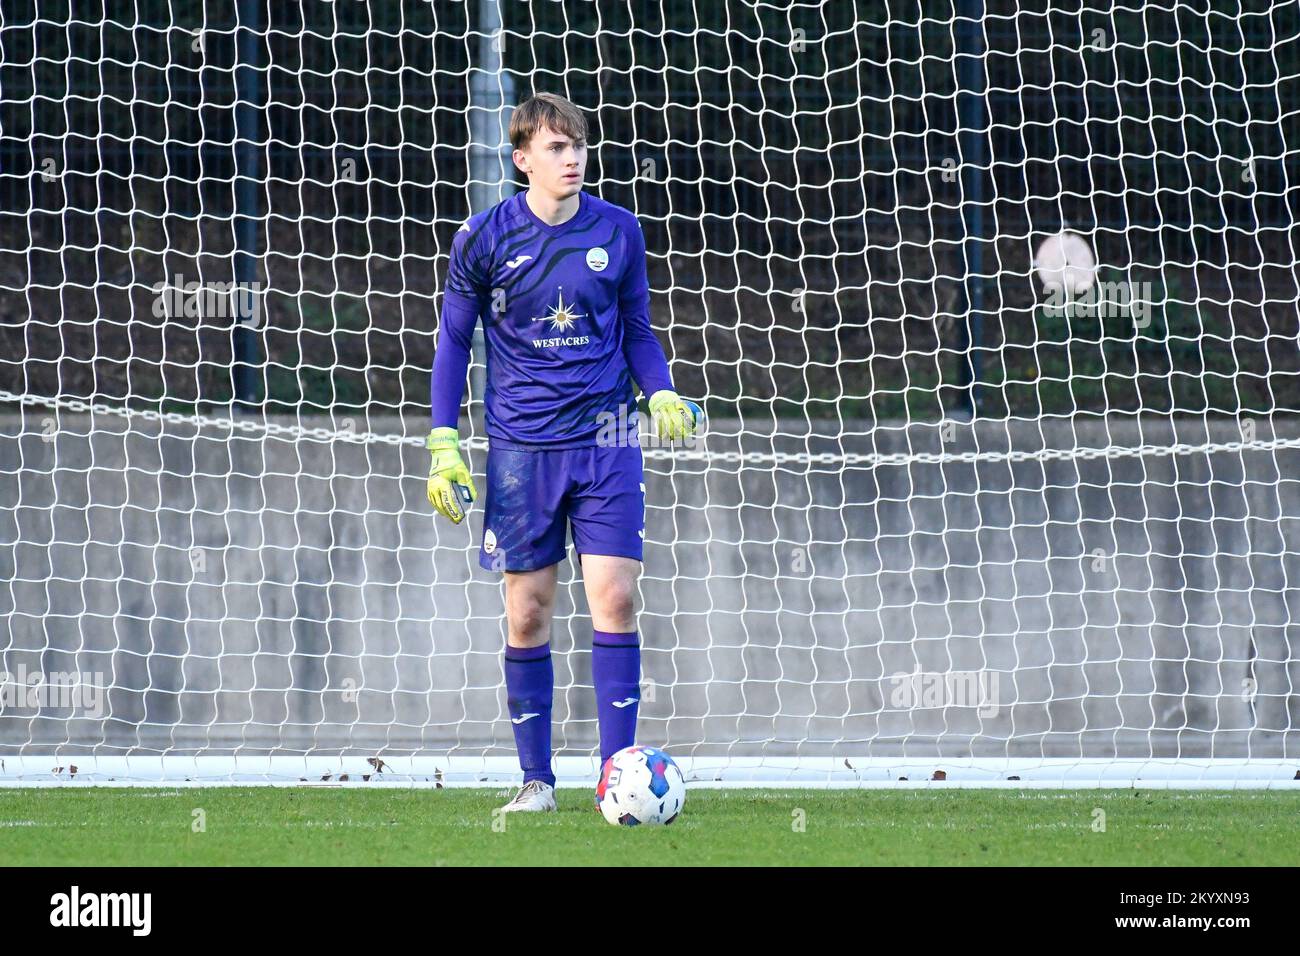 Swansea, Wales. 2 December 2022. Goalkeeper Remy Mitchell of Swansea City during the Premier League Cup game between Swansea City Under 21 and Stoke City Under 21 at the Swansea City Academy in Swansea, Wales, UK on 2 December 2022. Credit: Duncan Thomas/Majestic Media/Alamy Live News. Stock Photo